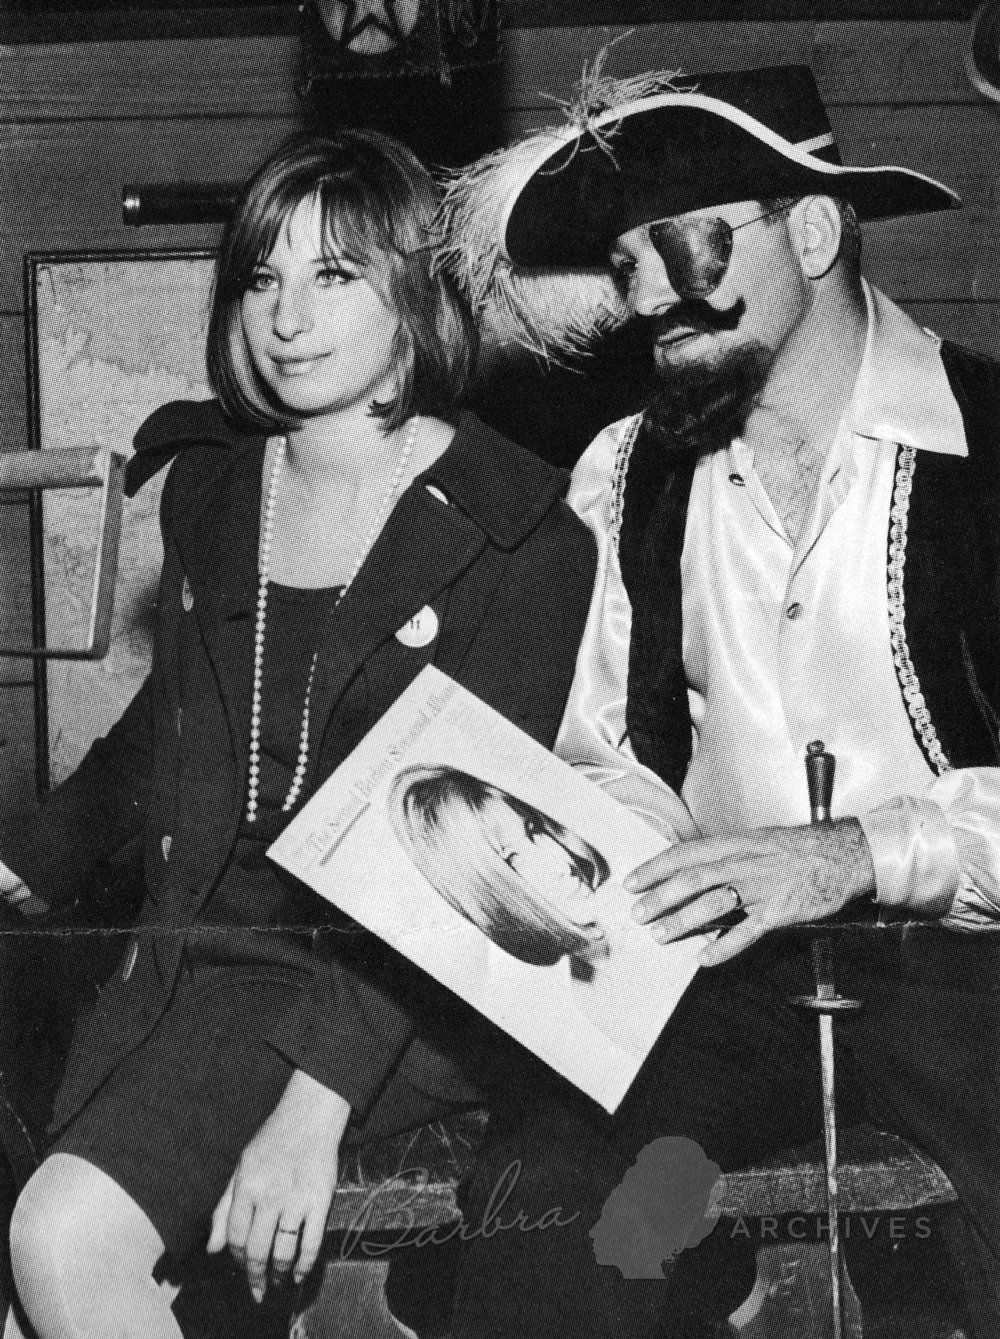 Streisand and Lamond, dressed as a pirate.